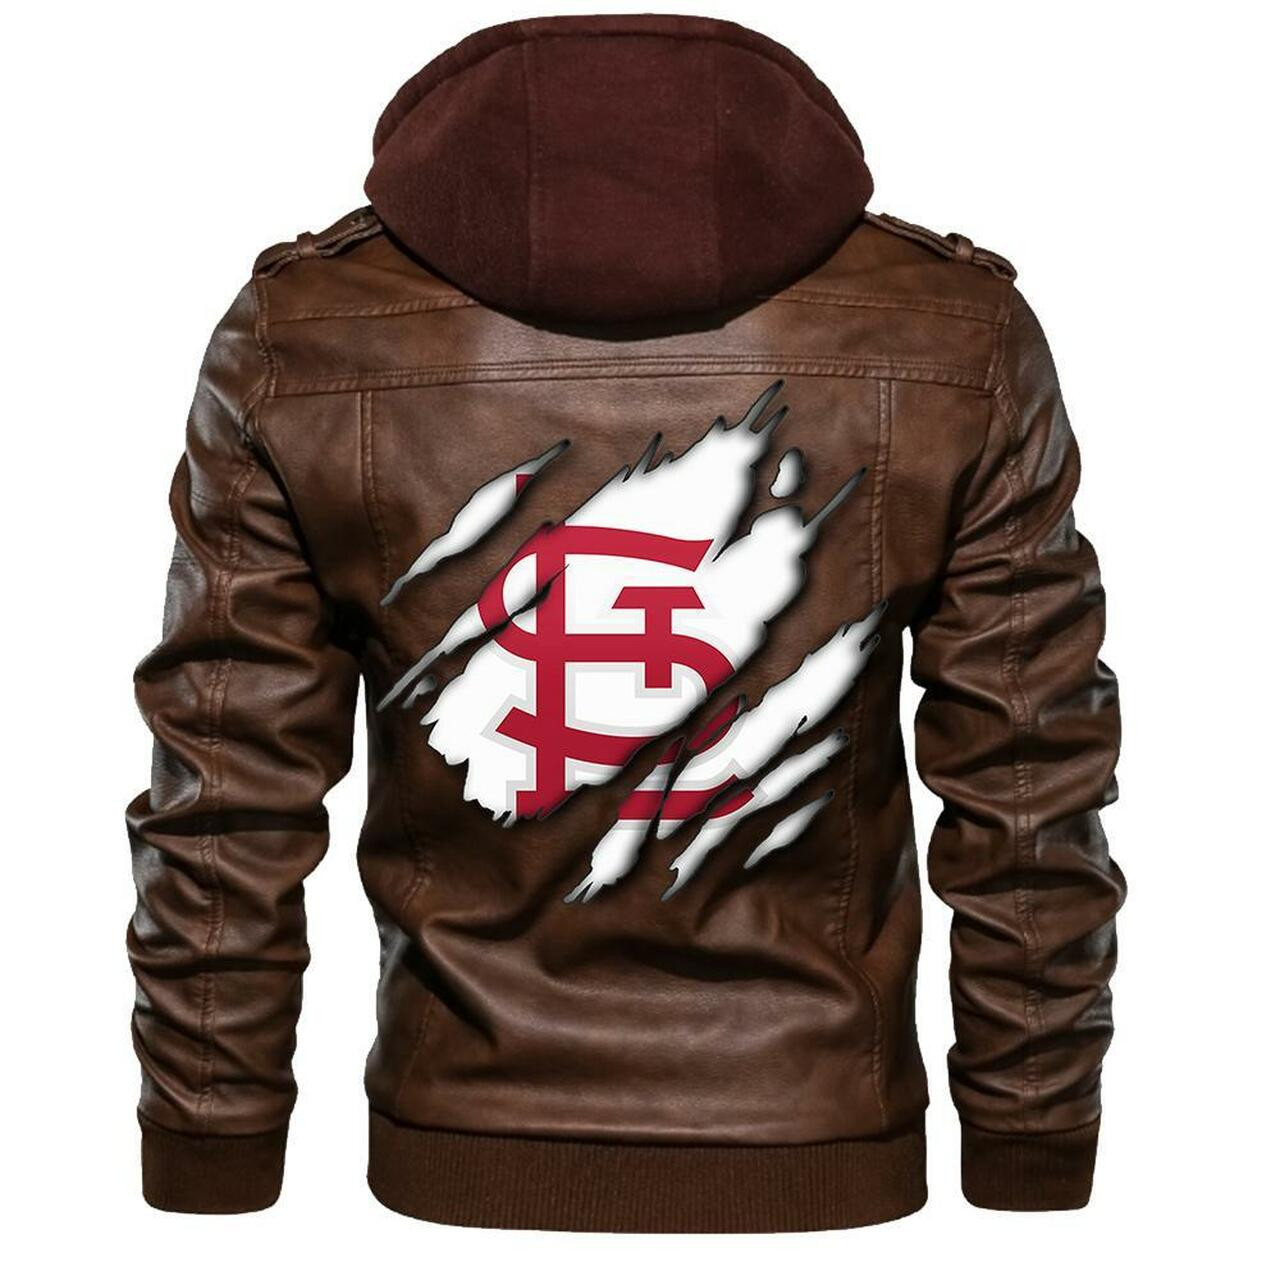 Check out and find the right leather jacket below 212